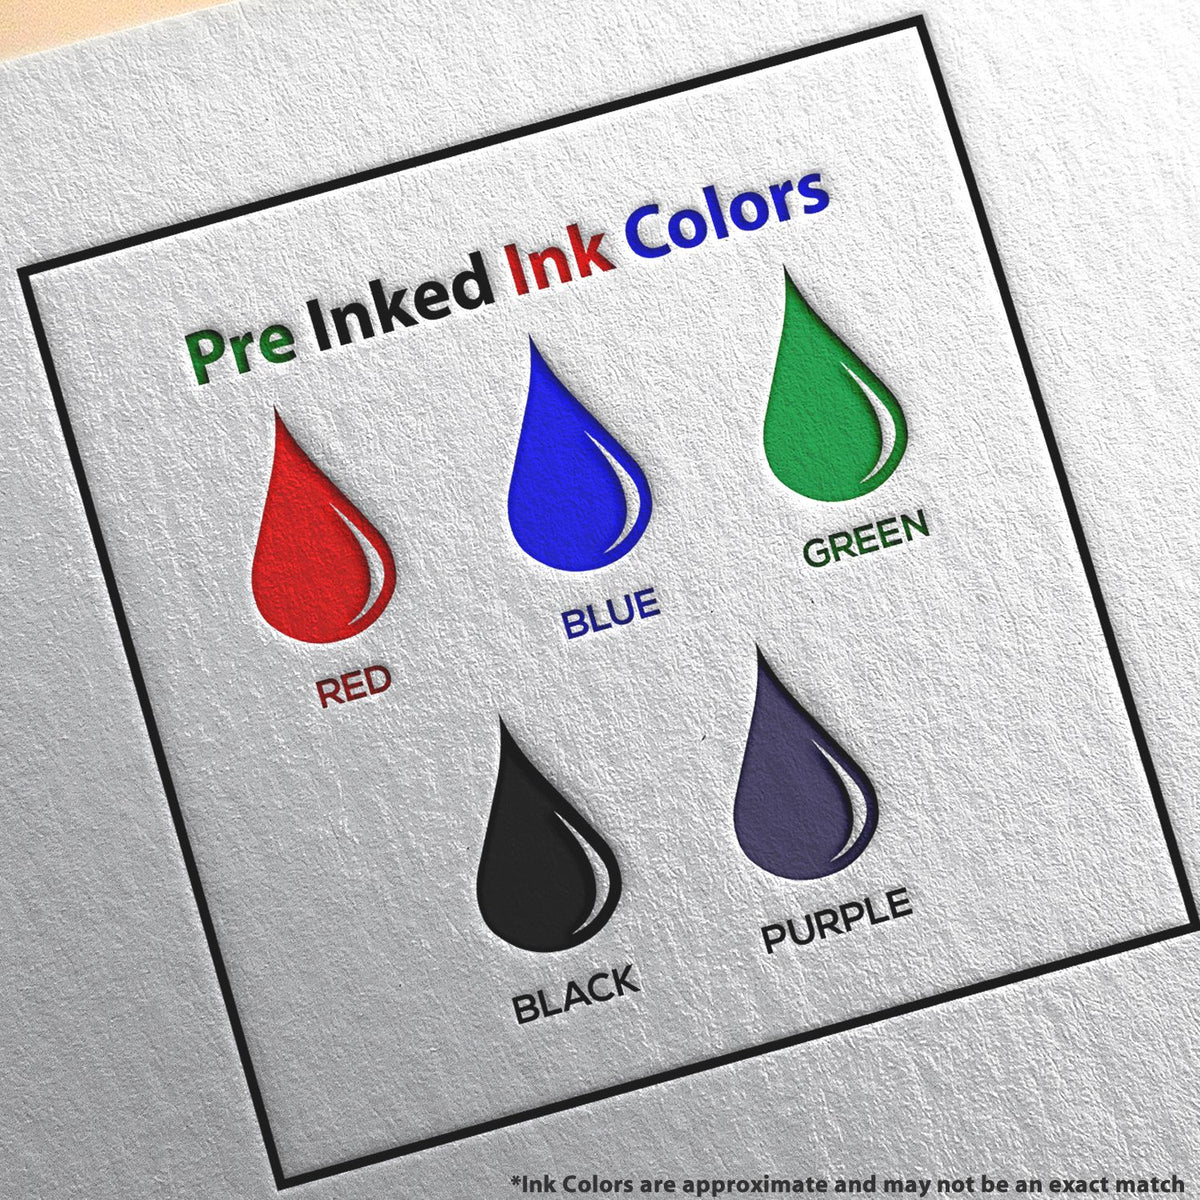 A picture showing the different ink colors or hues available for the Premium MaxLight Pre-Inked Washington Engineering Stamp product.